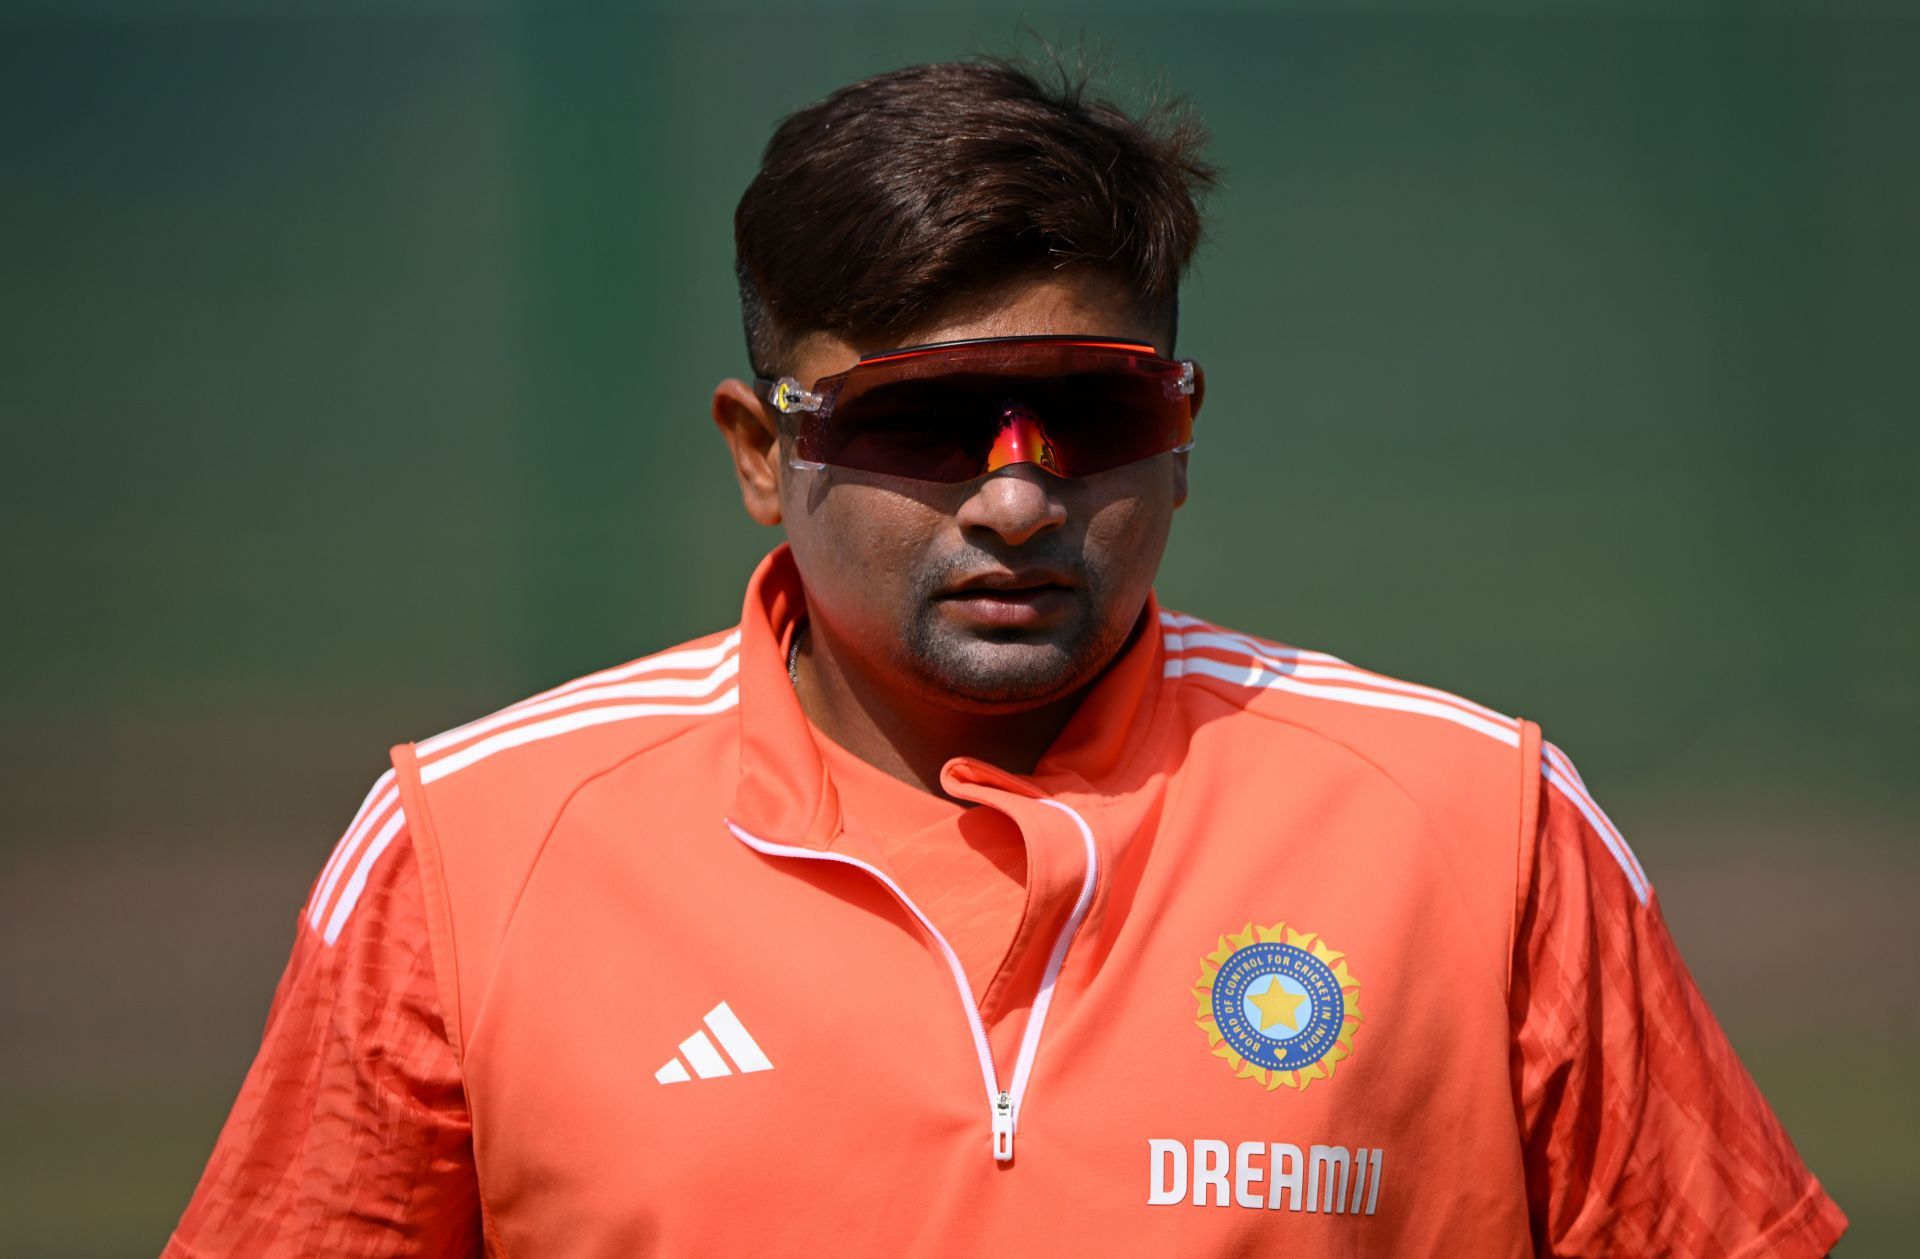 India are all set to hand out a maiden Test cap in Rajkot